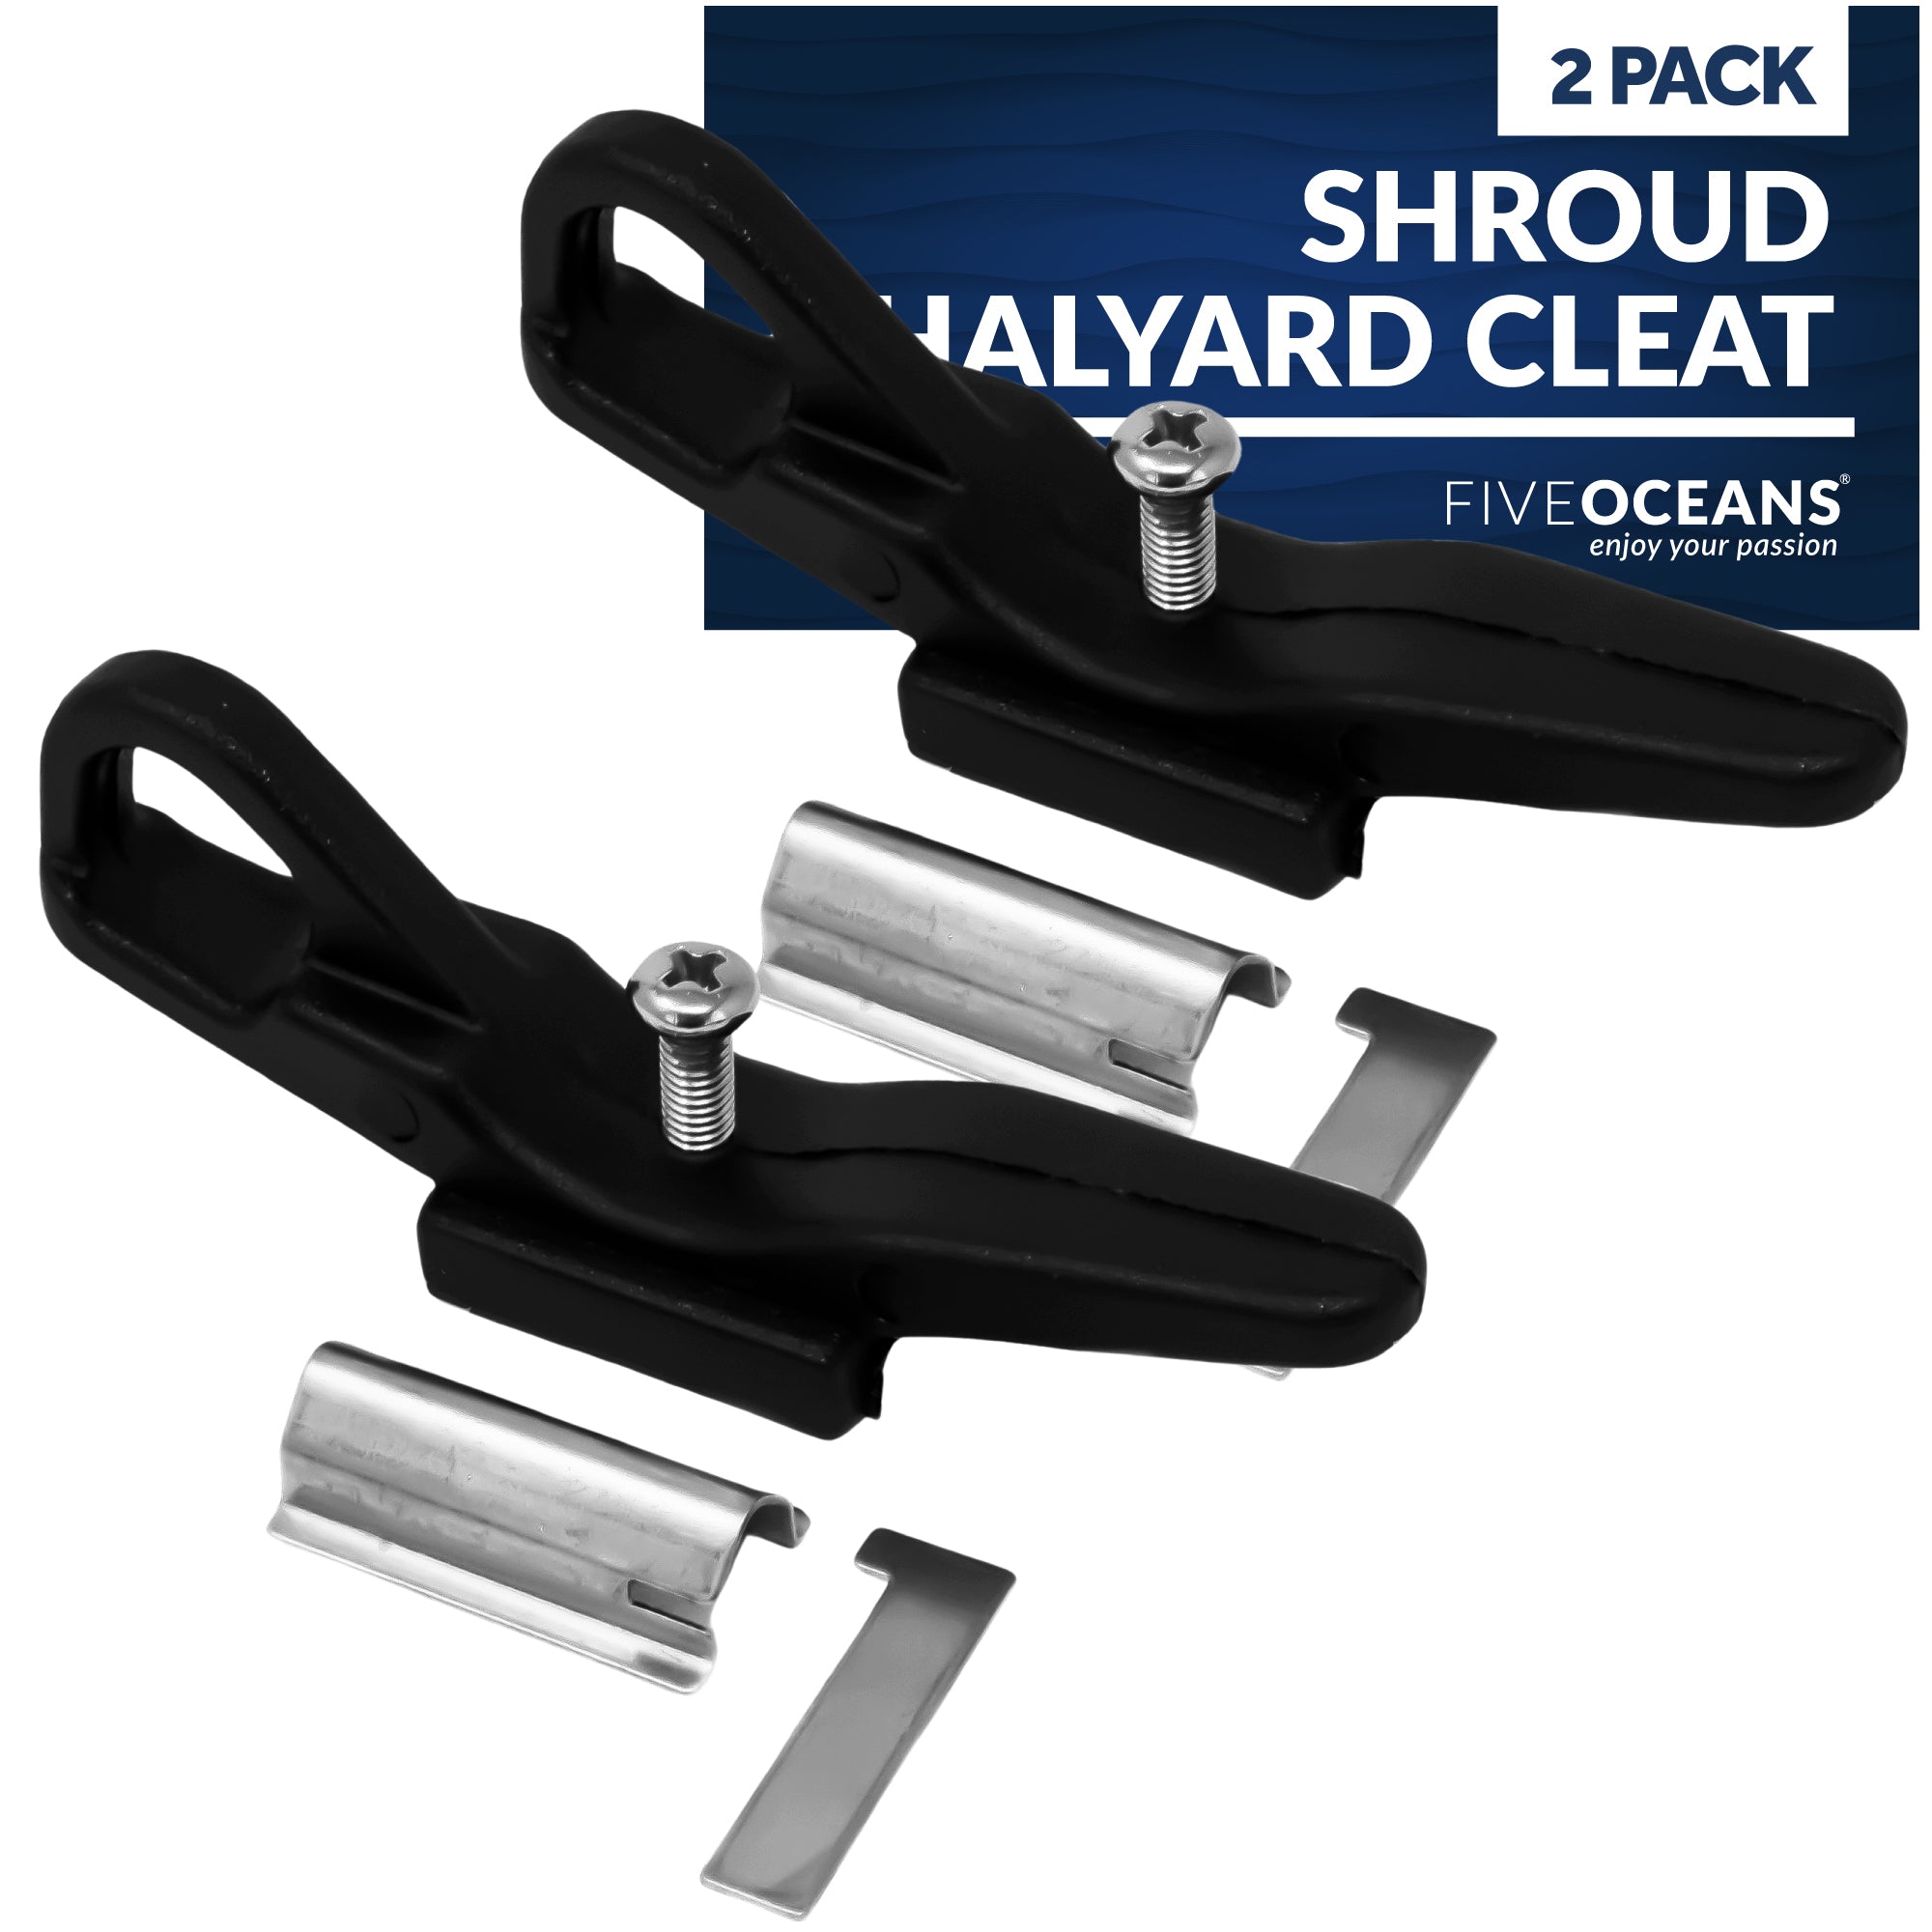 Nylon Shroud Halyard Cleat, Stainless Steel Mounting Plate, 2-Pack - FO2317-M2